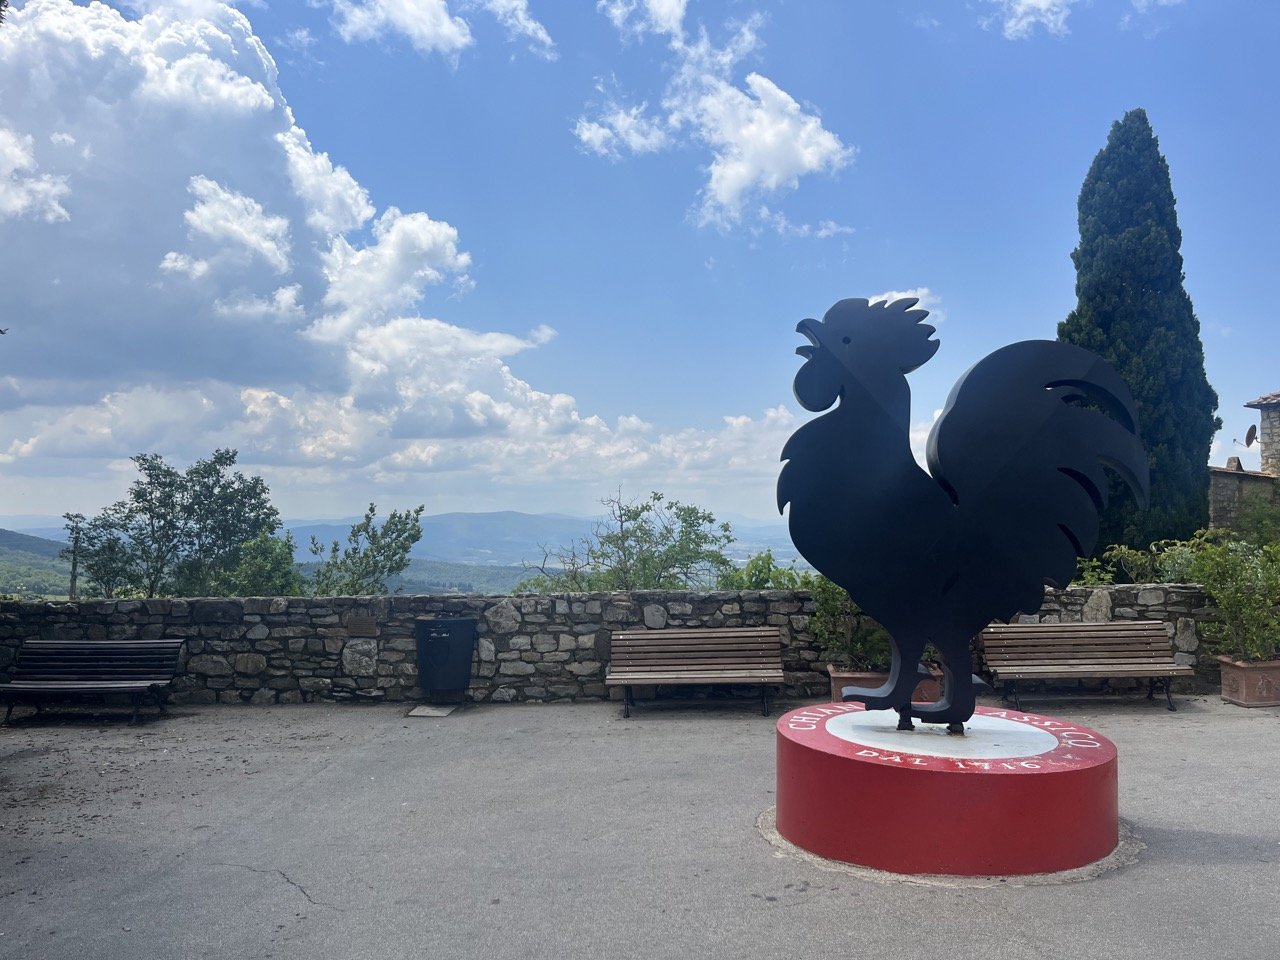 A giant black rooster statue on a red base with the words "Chianti Classico" stamped on it in front of a lookout point in the town of Castellina in Chianti.